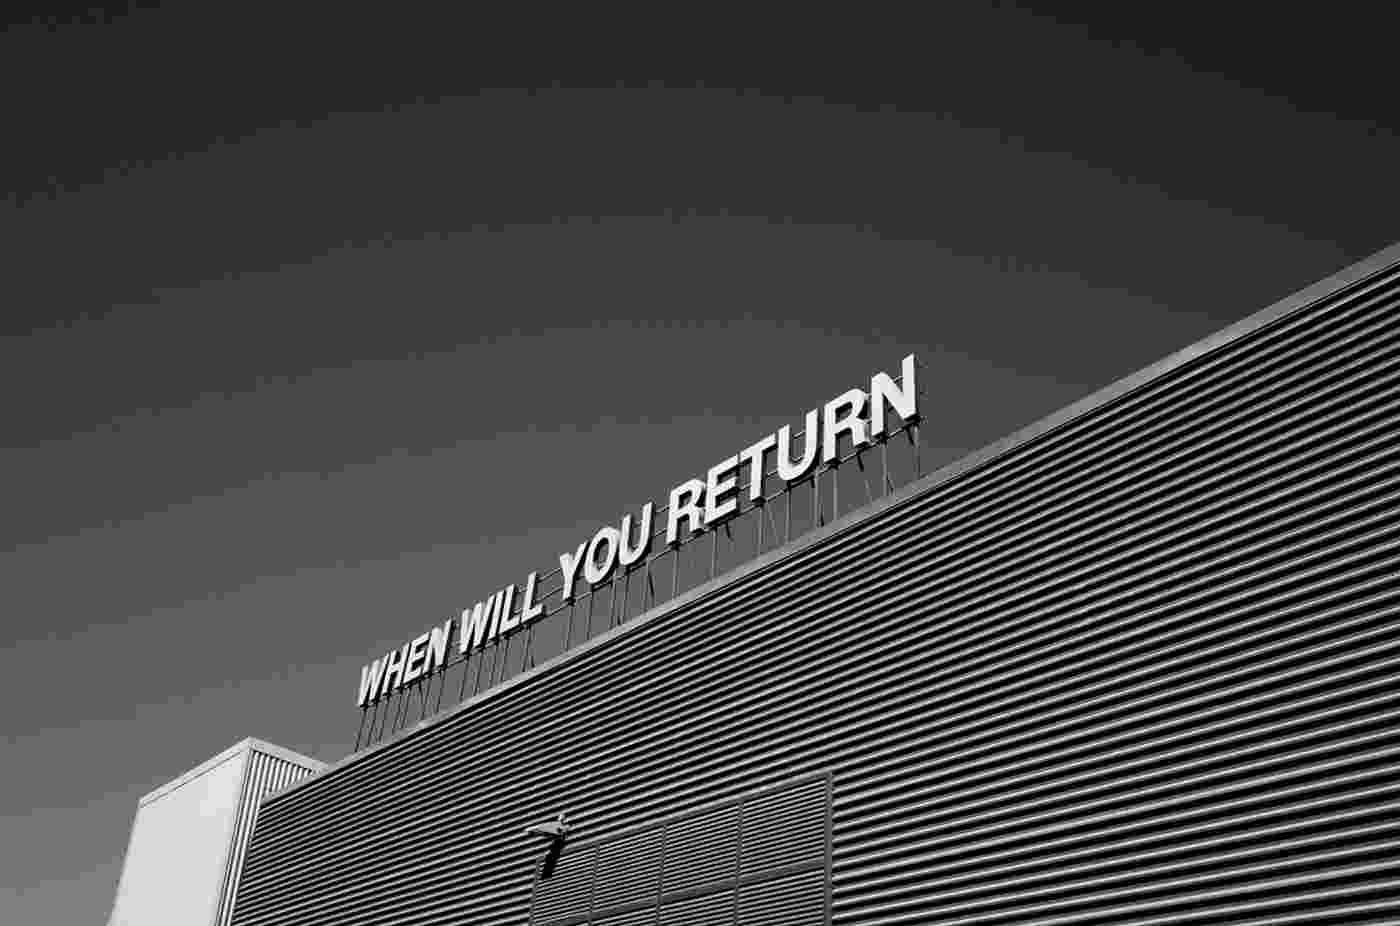 When Will You Return